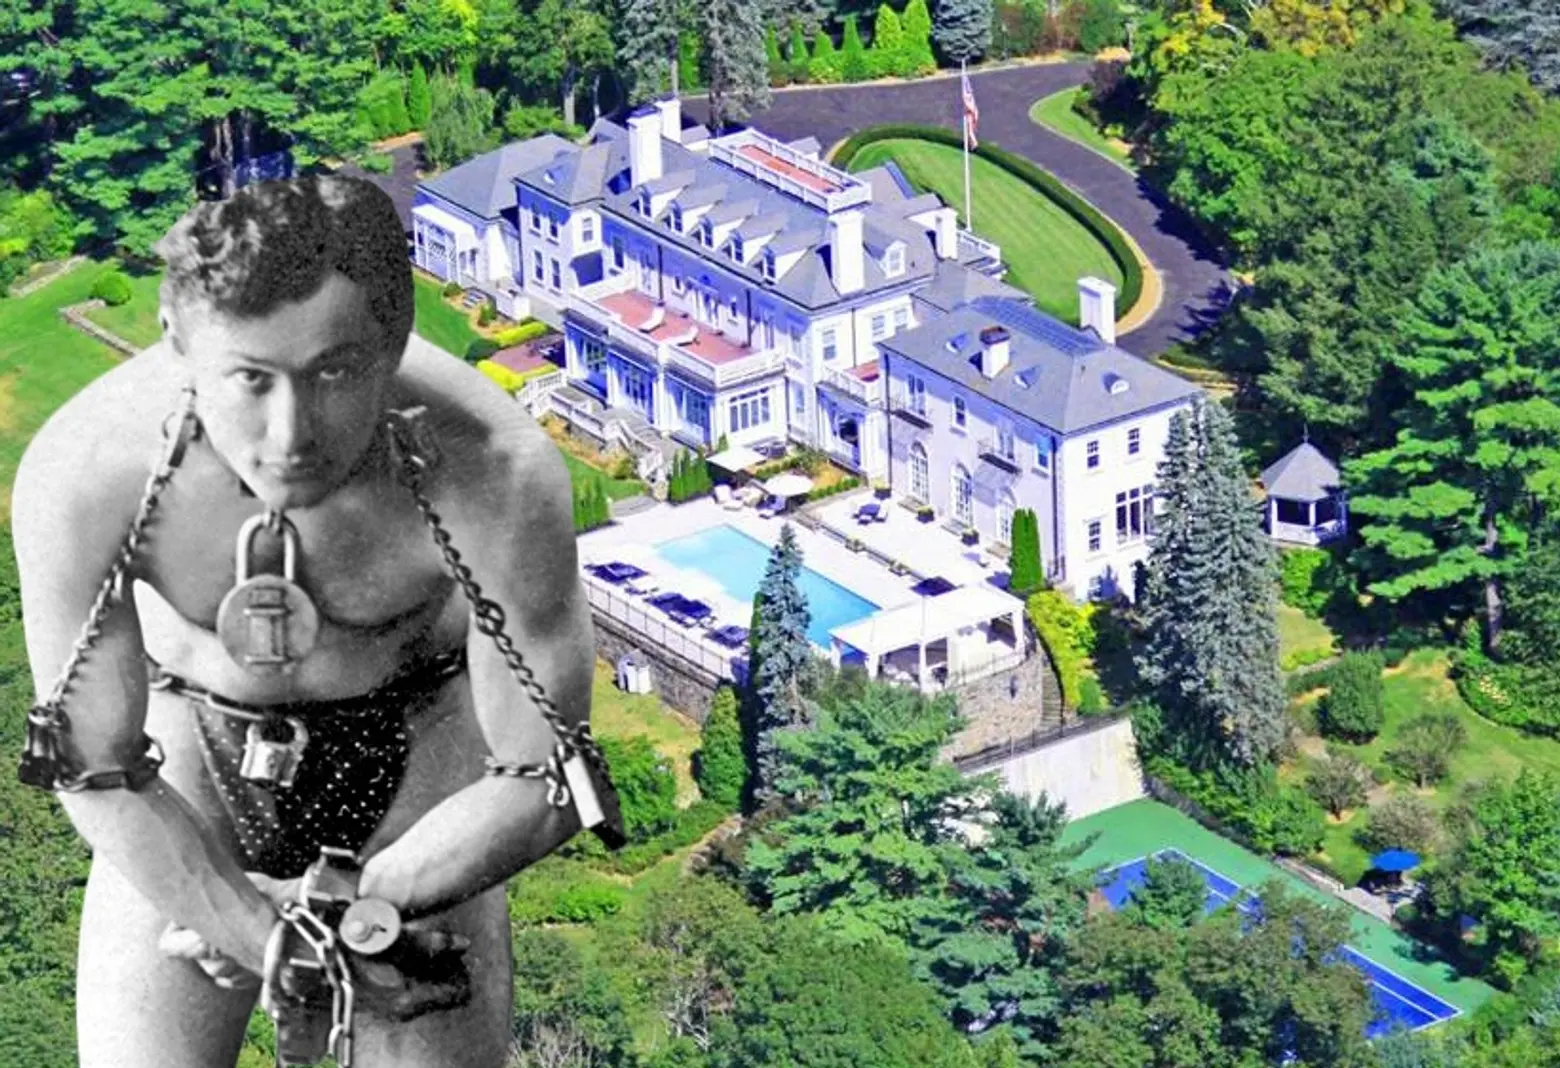 Connecticut Georgian estate where Harry Houdini hung out is up for auction for $4.75M